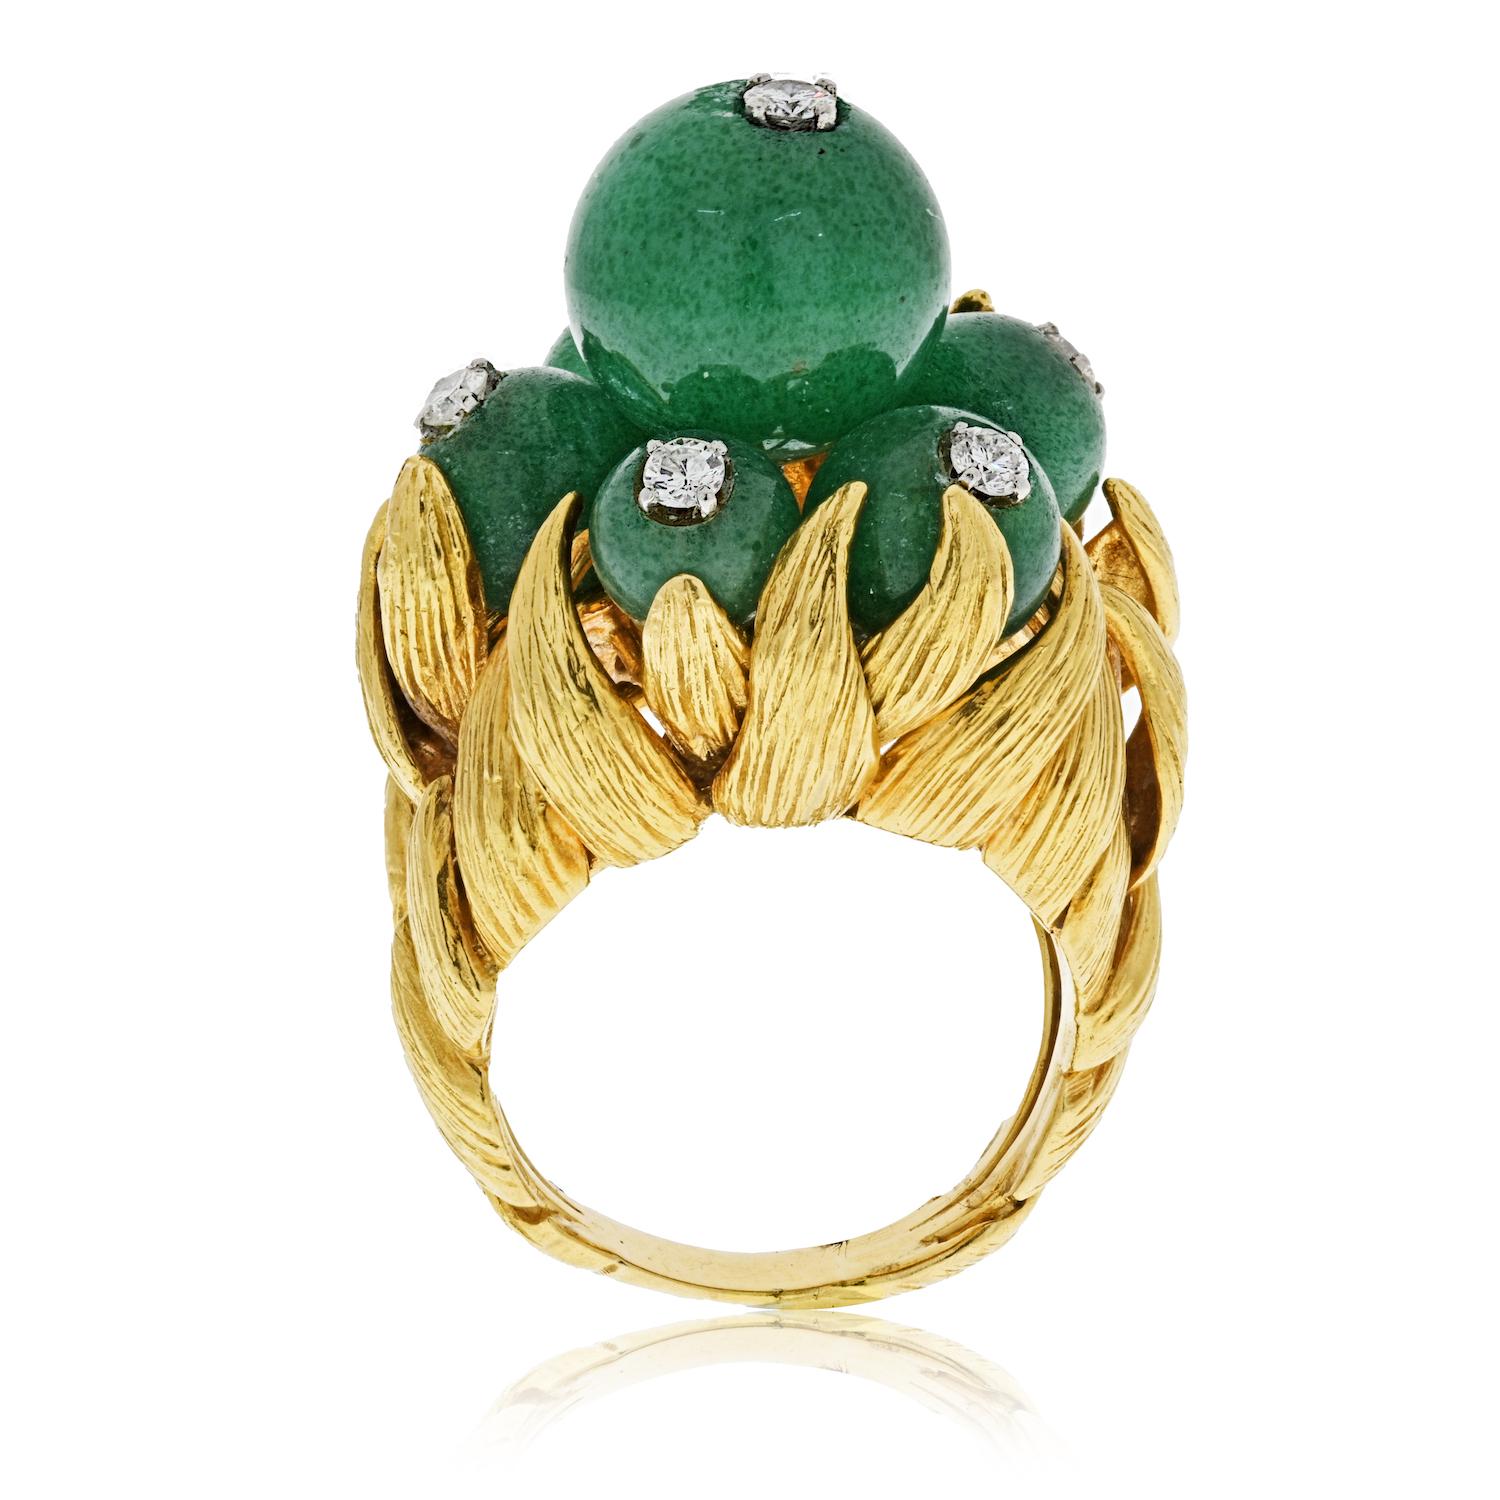 David Webb Circa 1970 18k yellow gold ring with six balls of chrysoprase with diamonds topping the center of each ball in a stylized leaf mounting. Ring size 8.5. This ring currently measures approximately 0.90 inches in depth (when measured on the